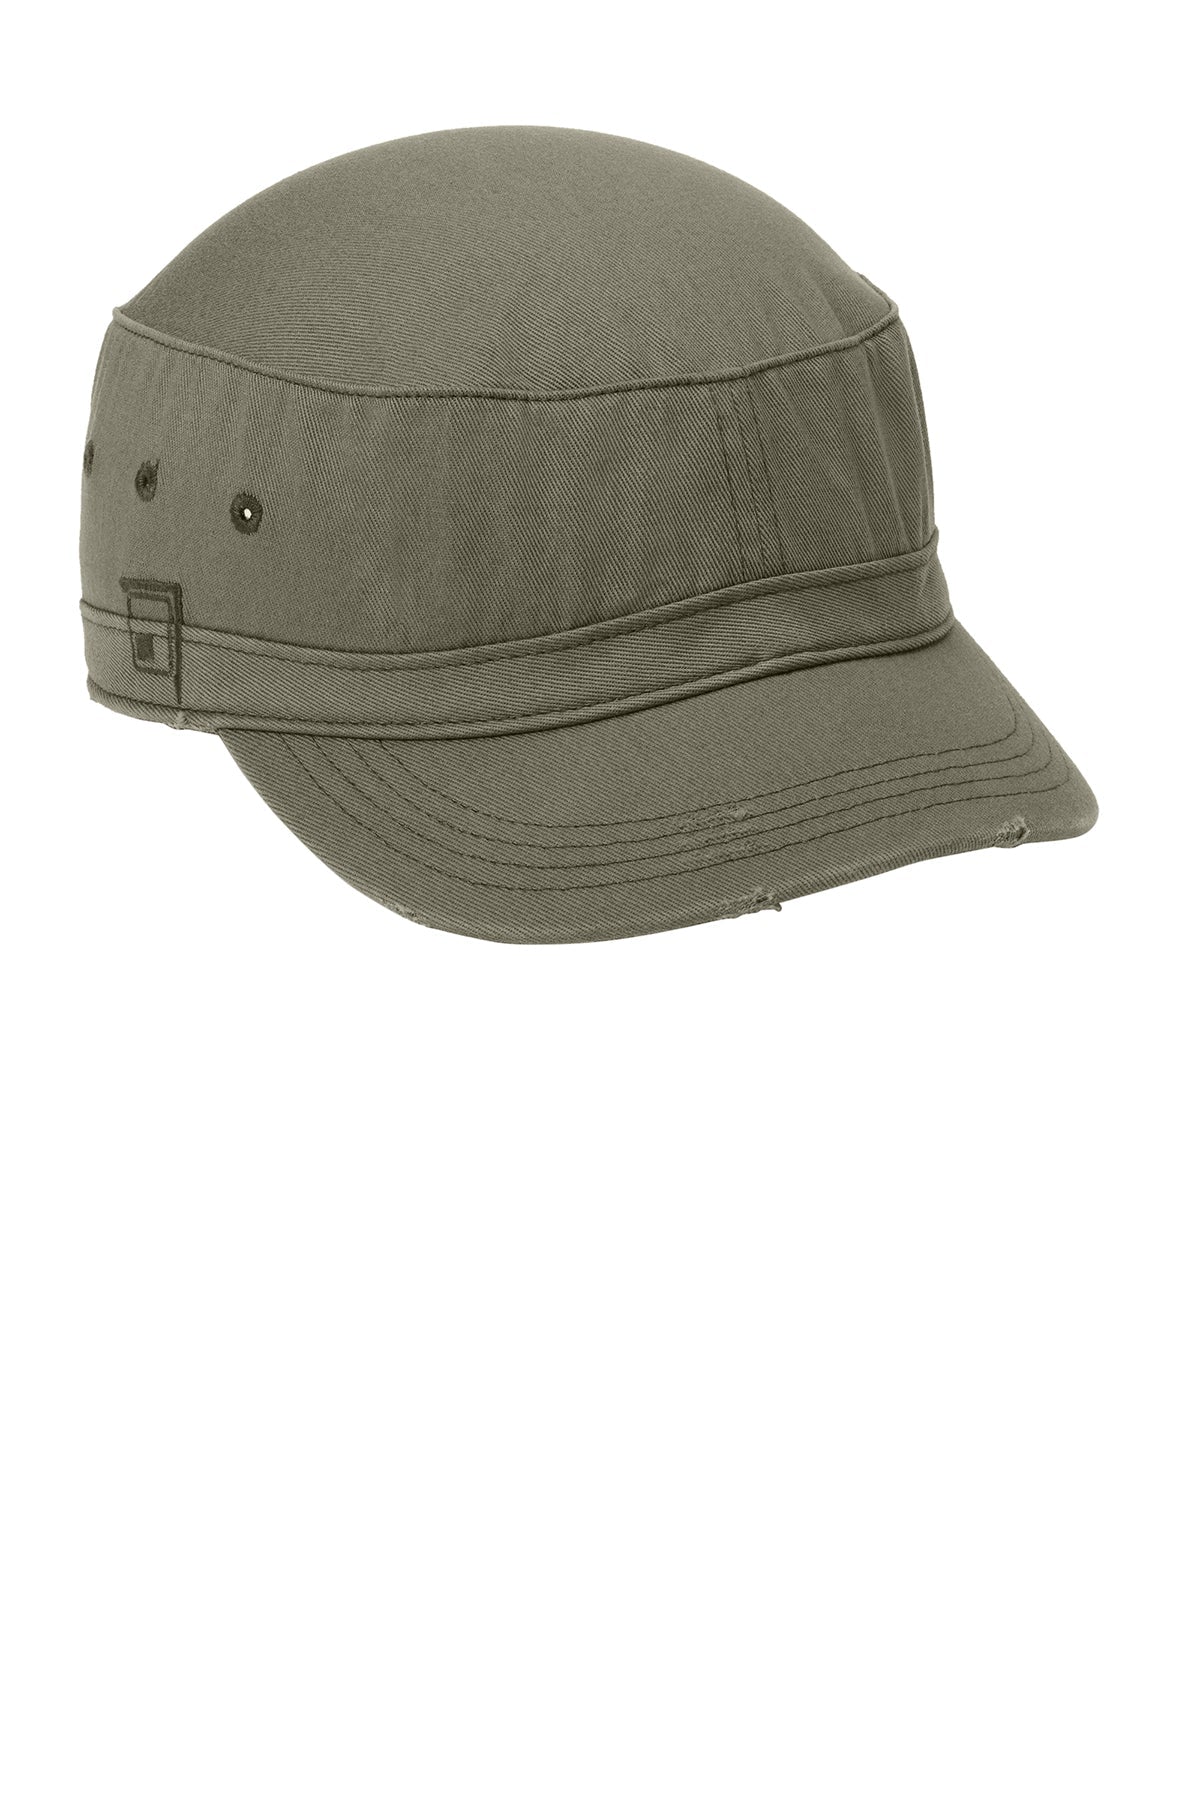 District Distressed Military Hats, Olive